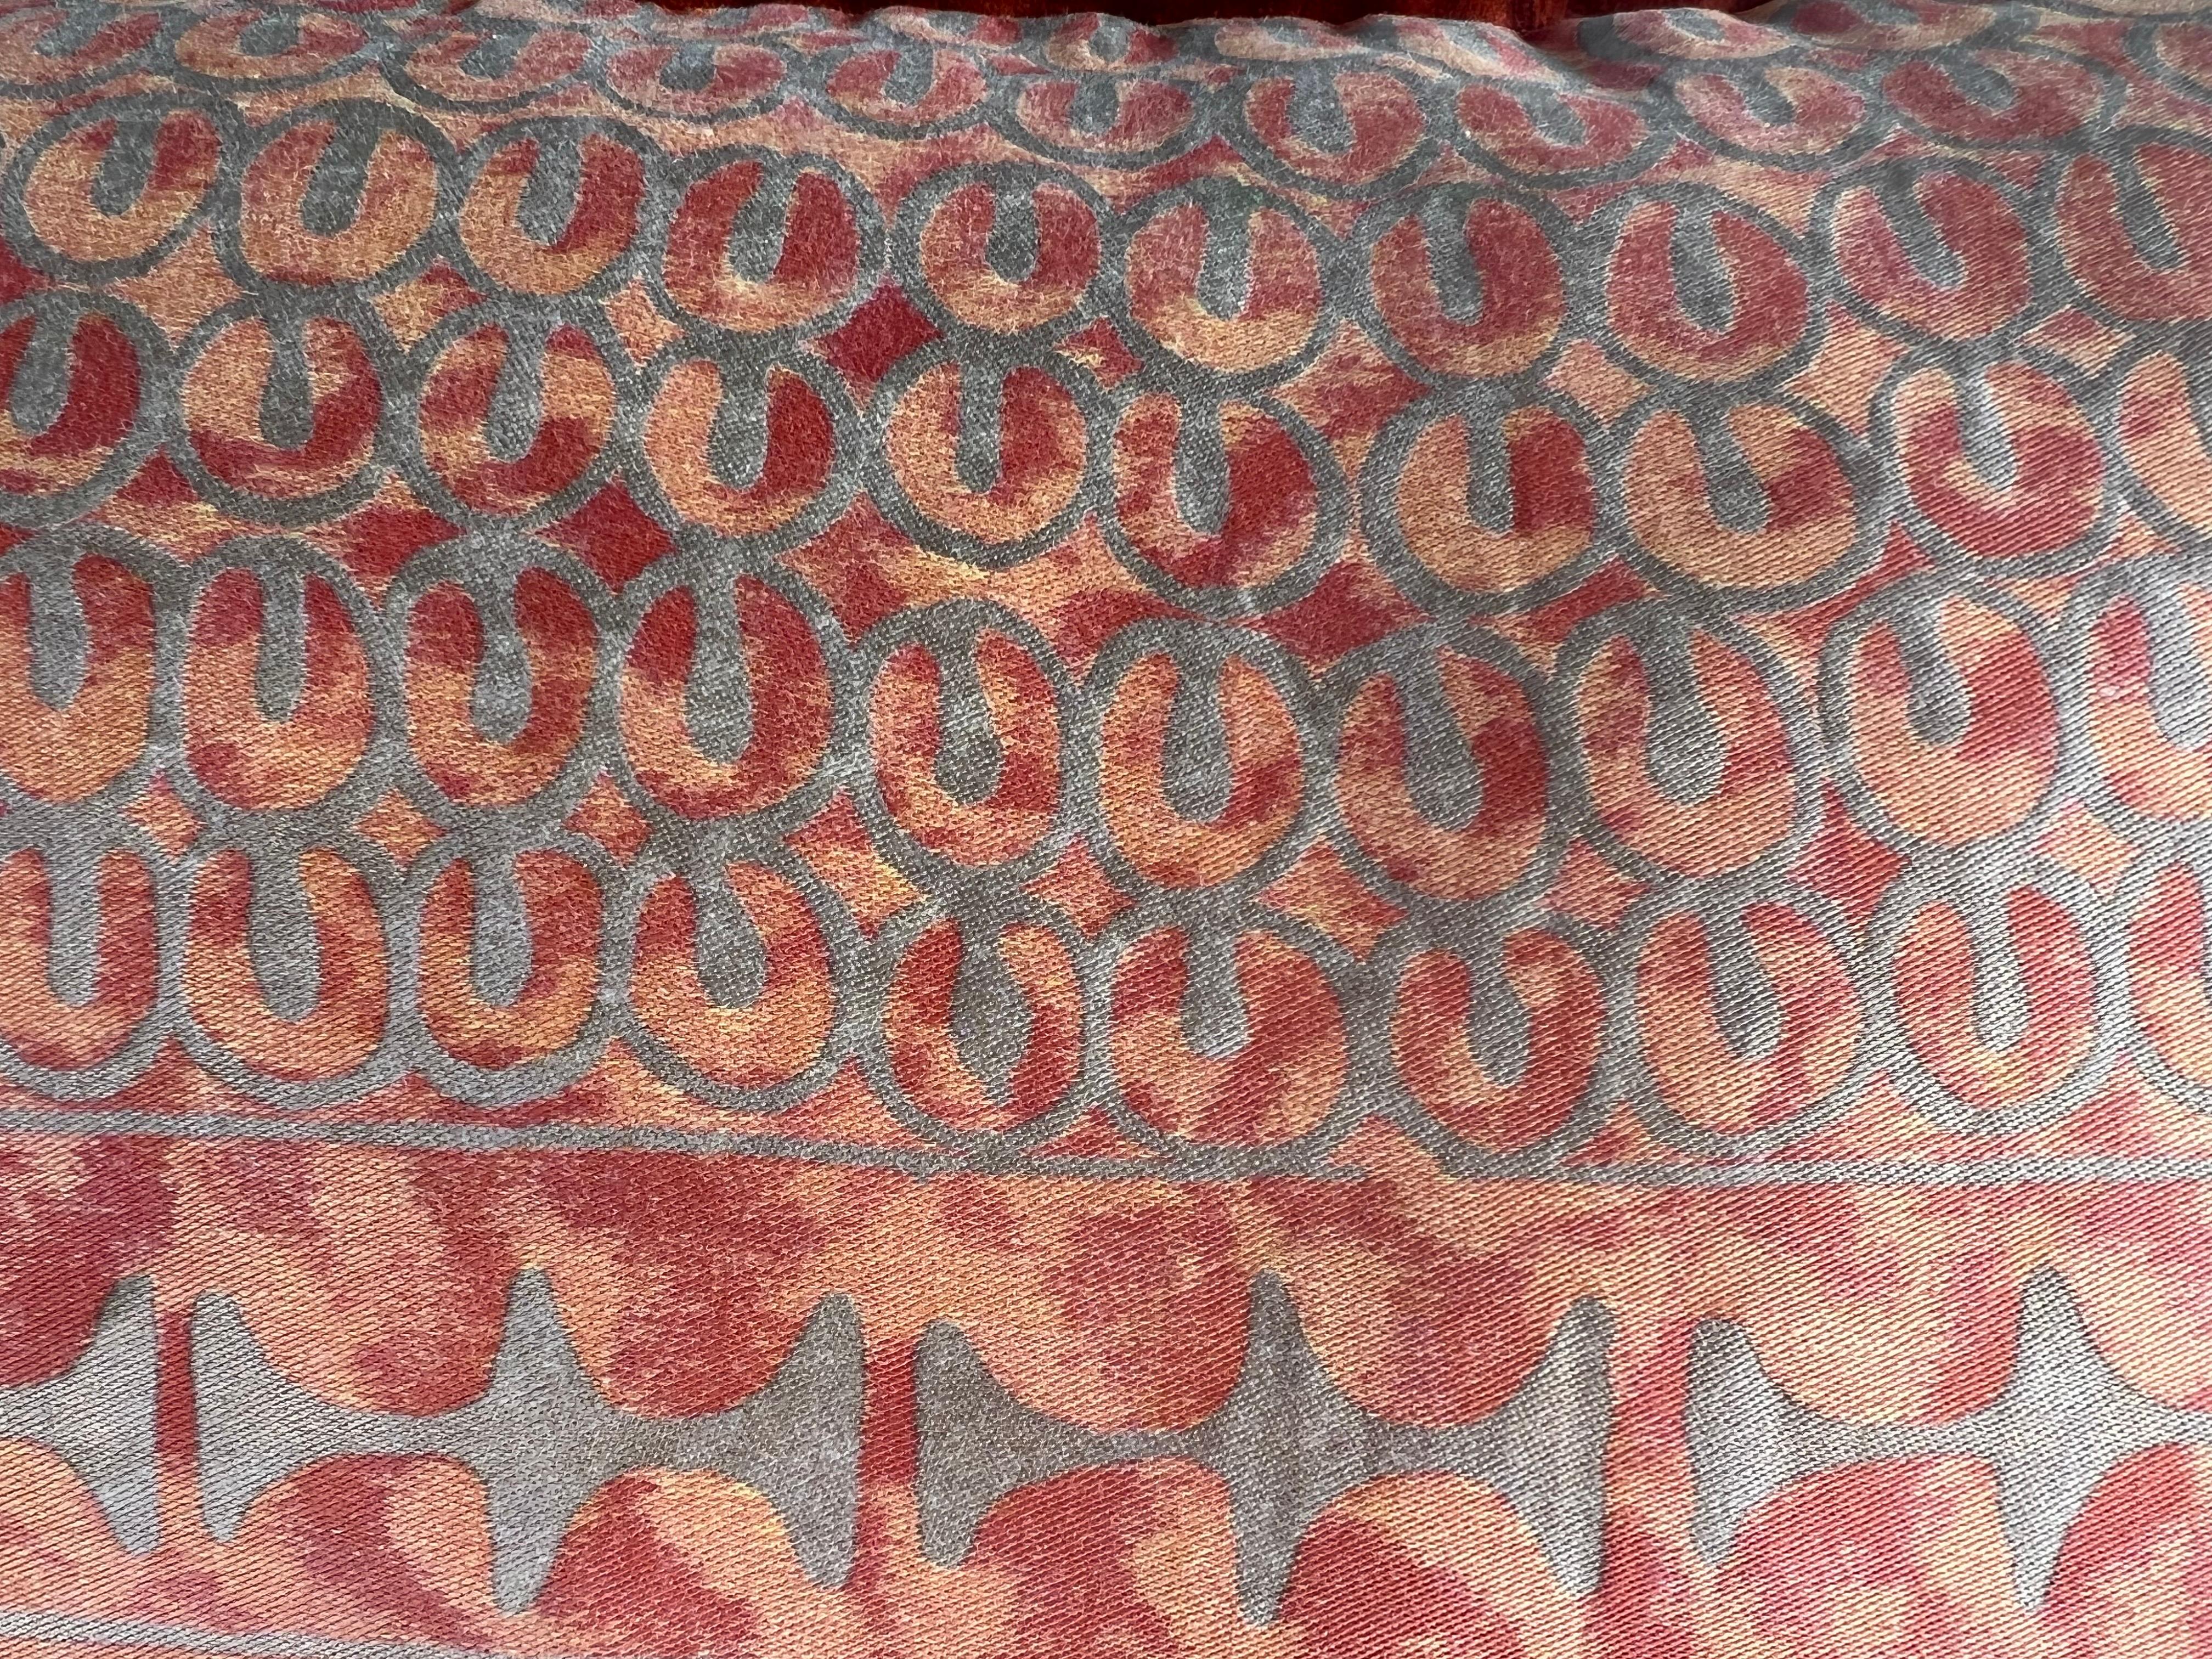 20th Century Pair of Authentic Fortuny Textile Pillows